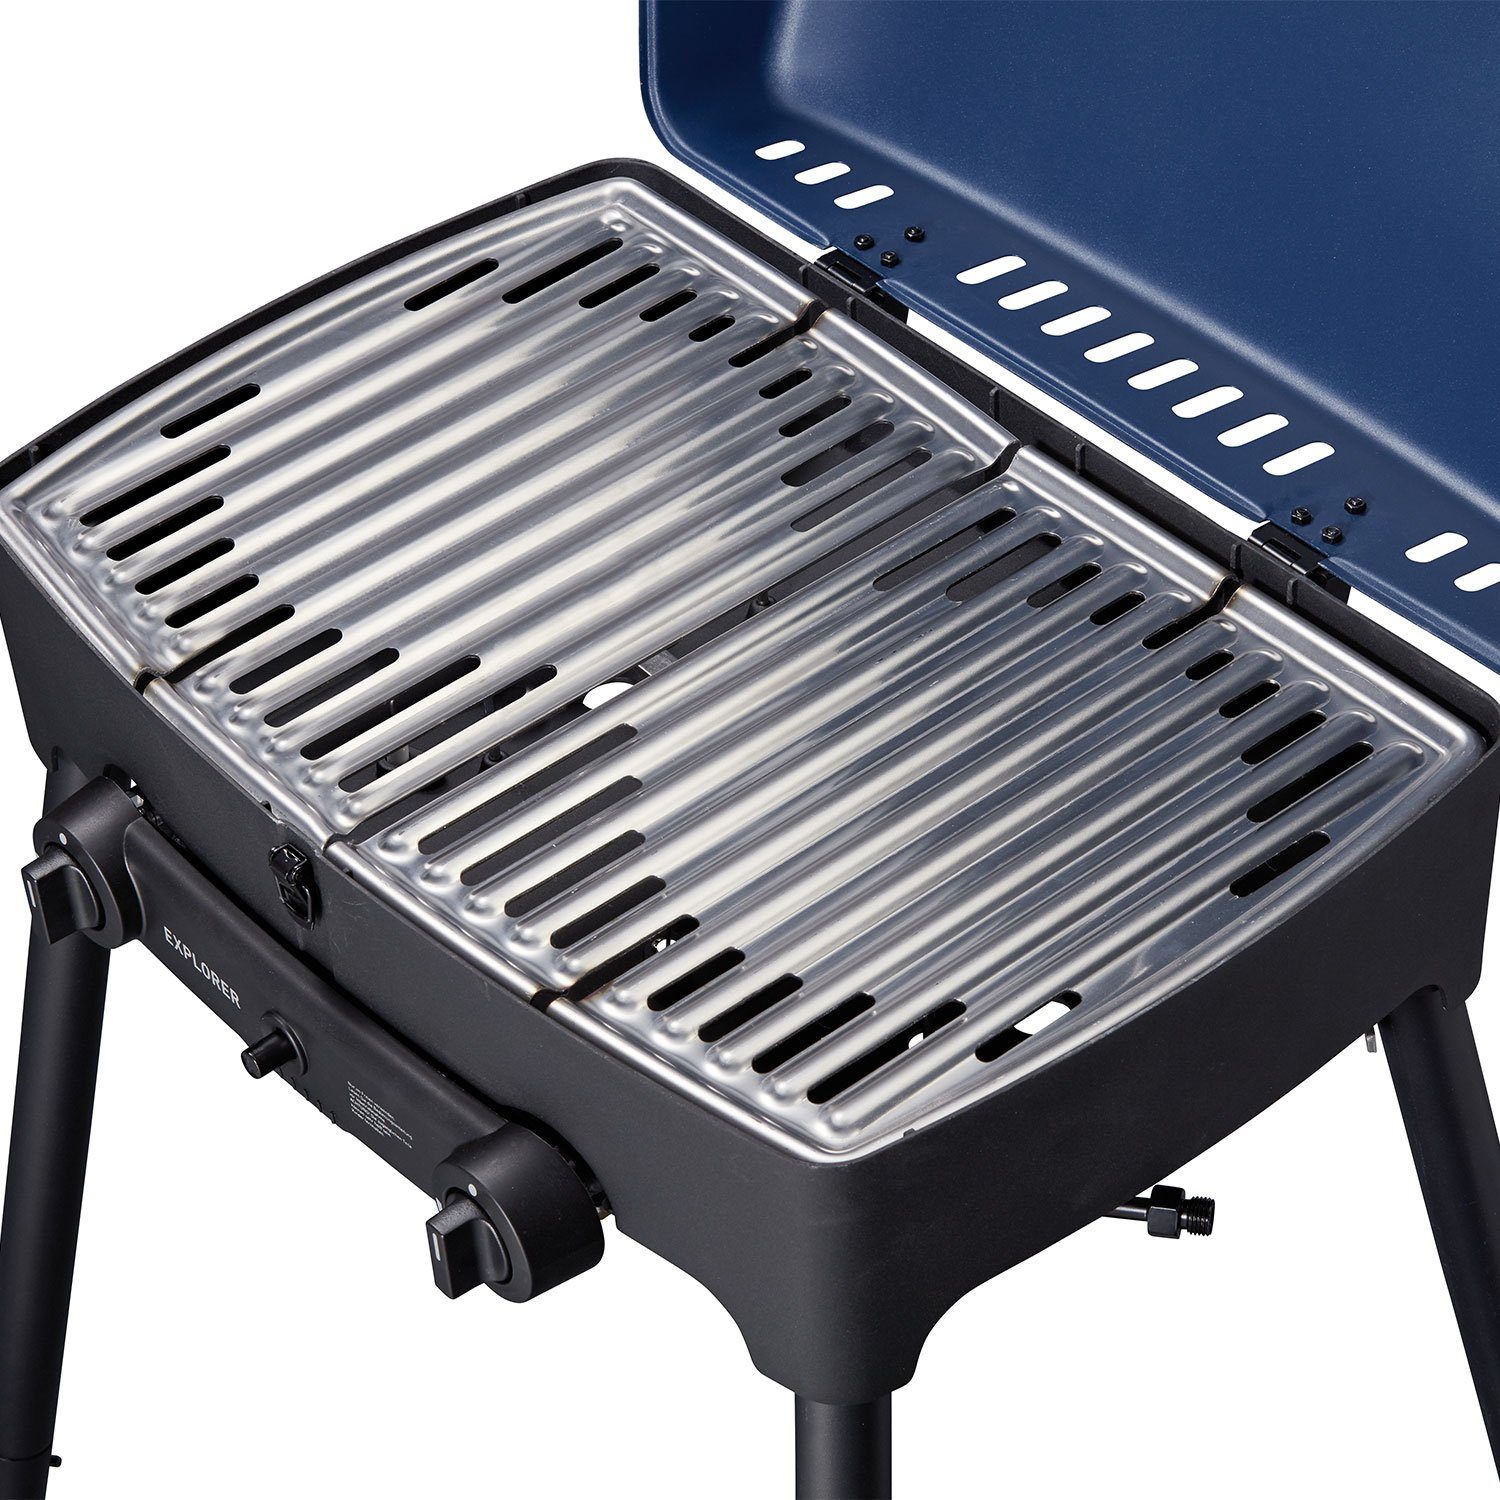 Grill Gas - Next Camping Camping Brenner Gasgrill, Enders® Explorer 2 Grill - Gasgrill